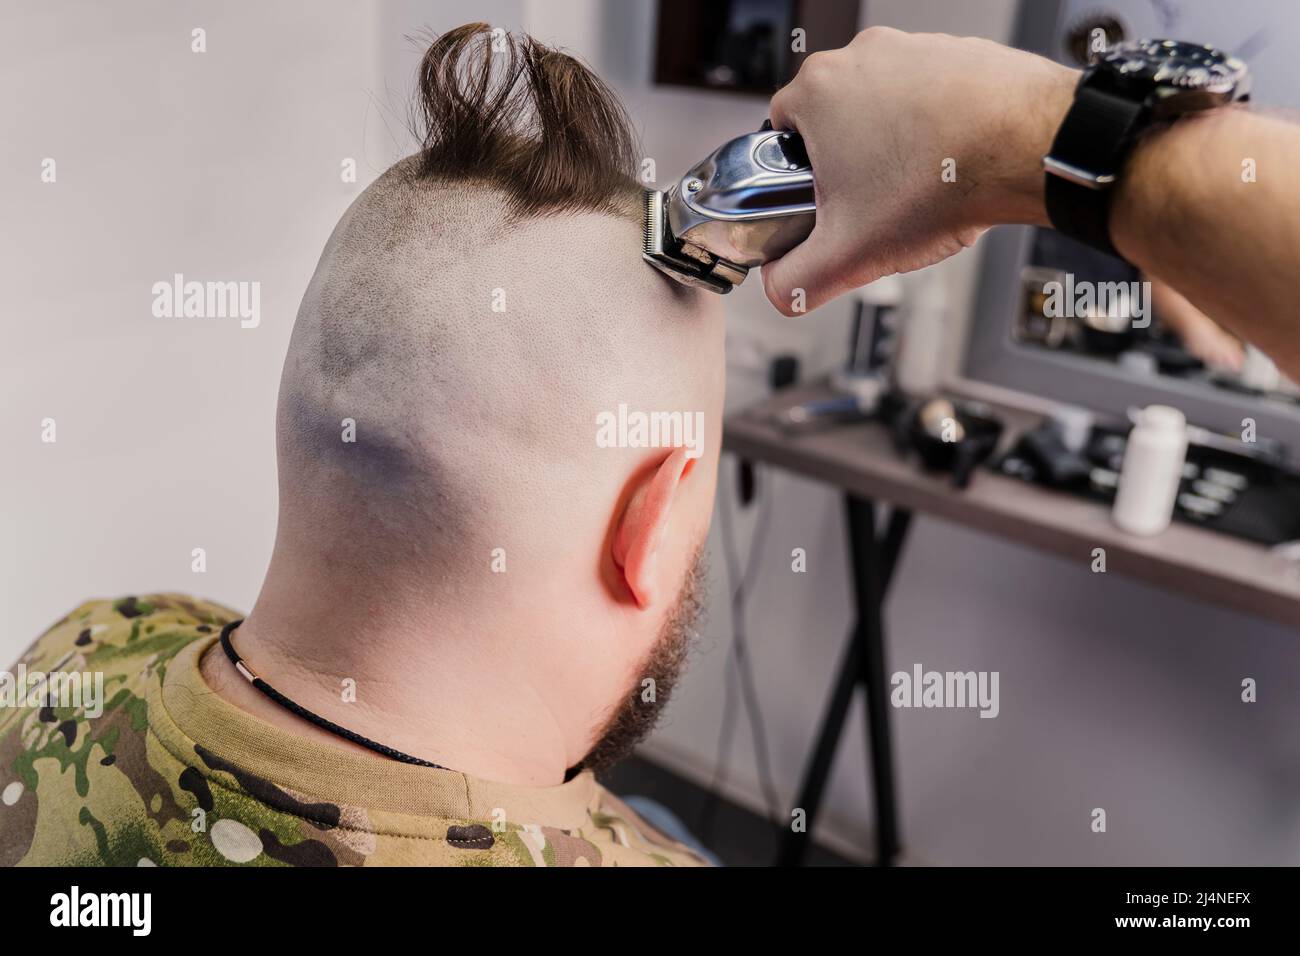 A young man in a military uniform shaves his head bald for military service. A guy with a beard gets a haircut at a barber shop. Stock Photo